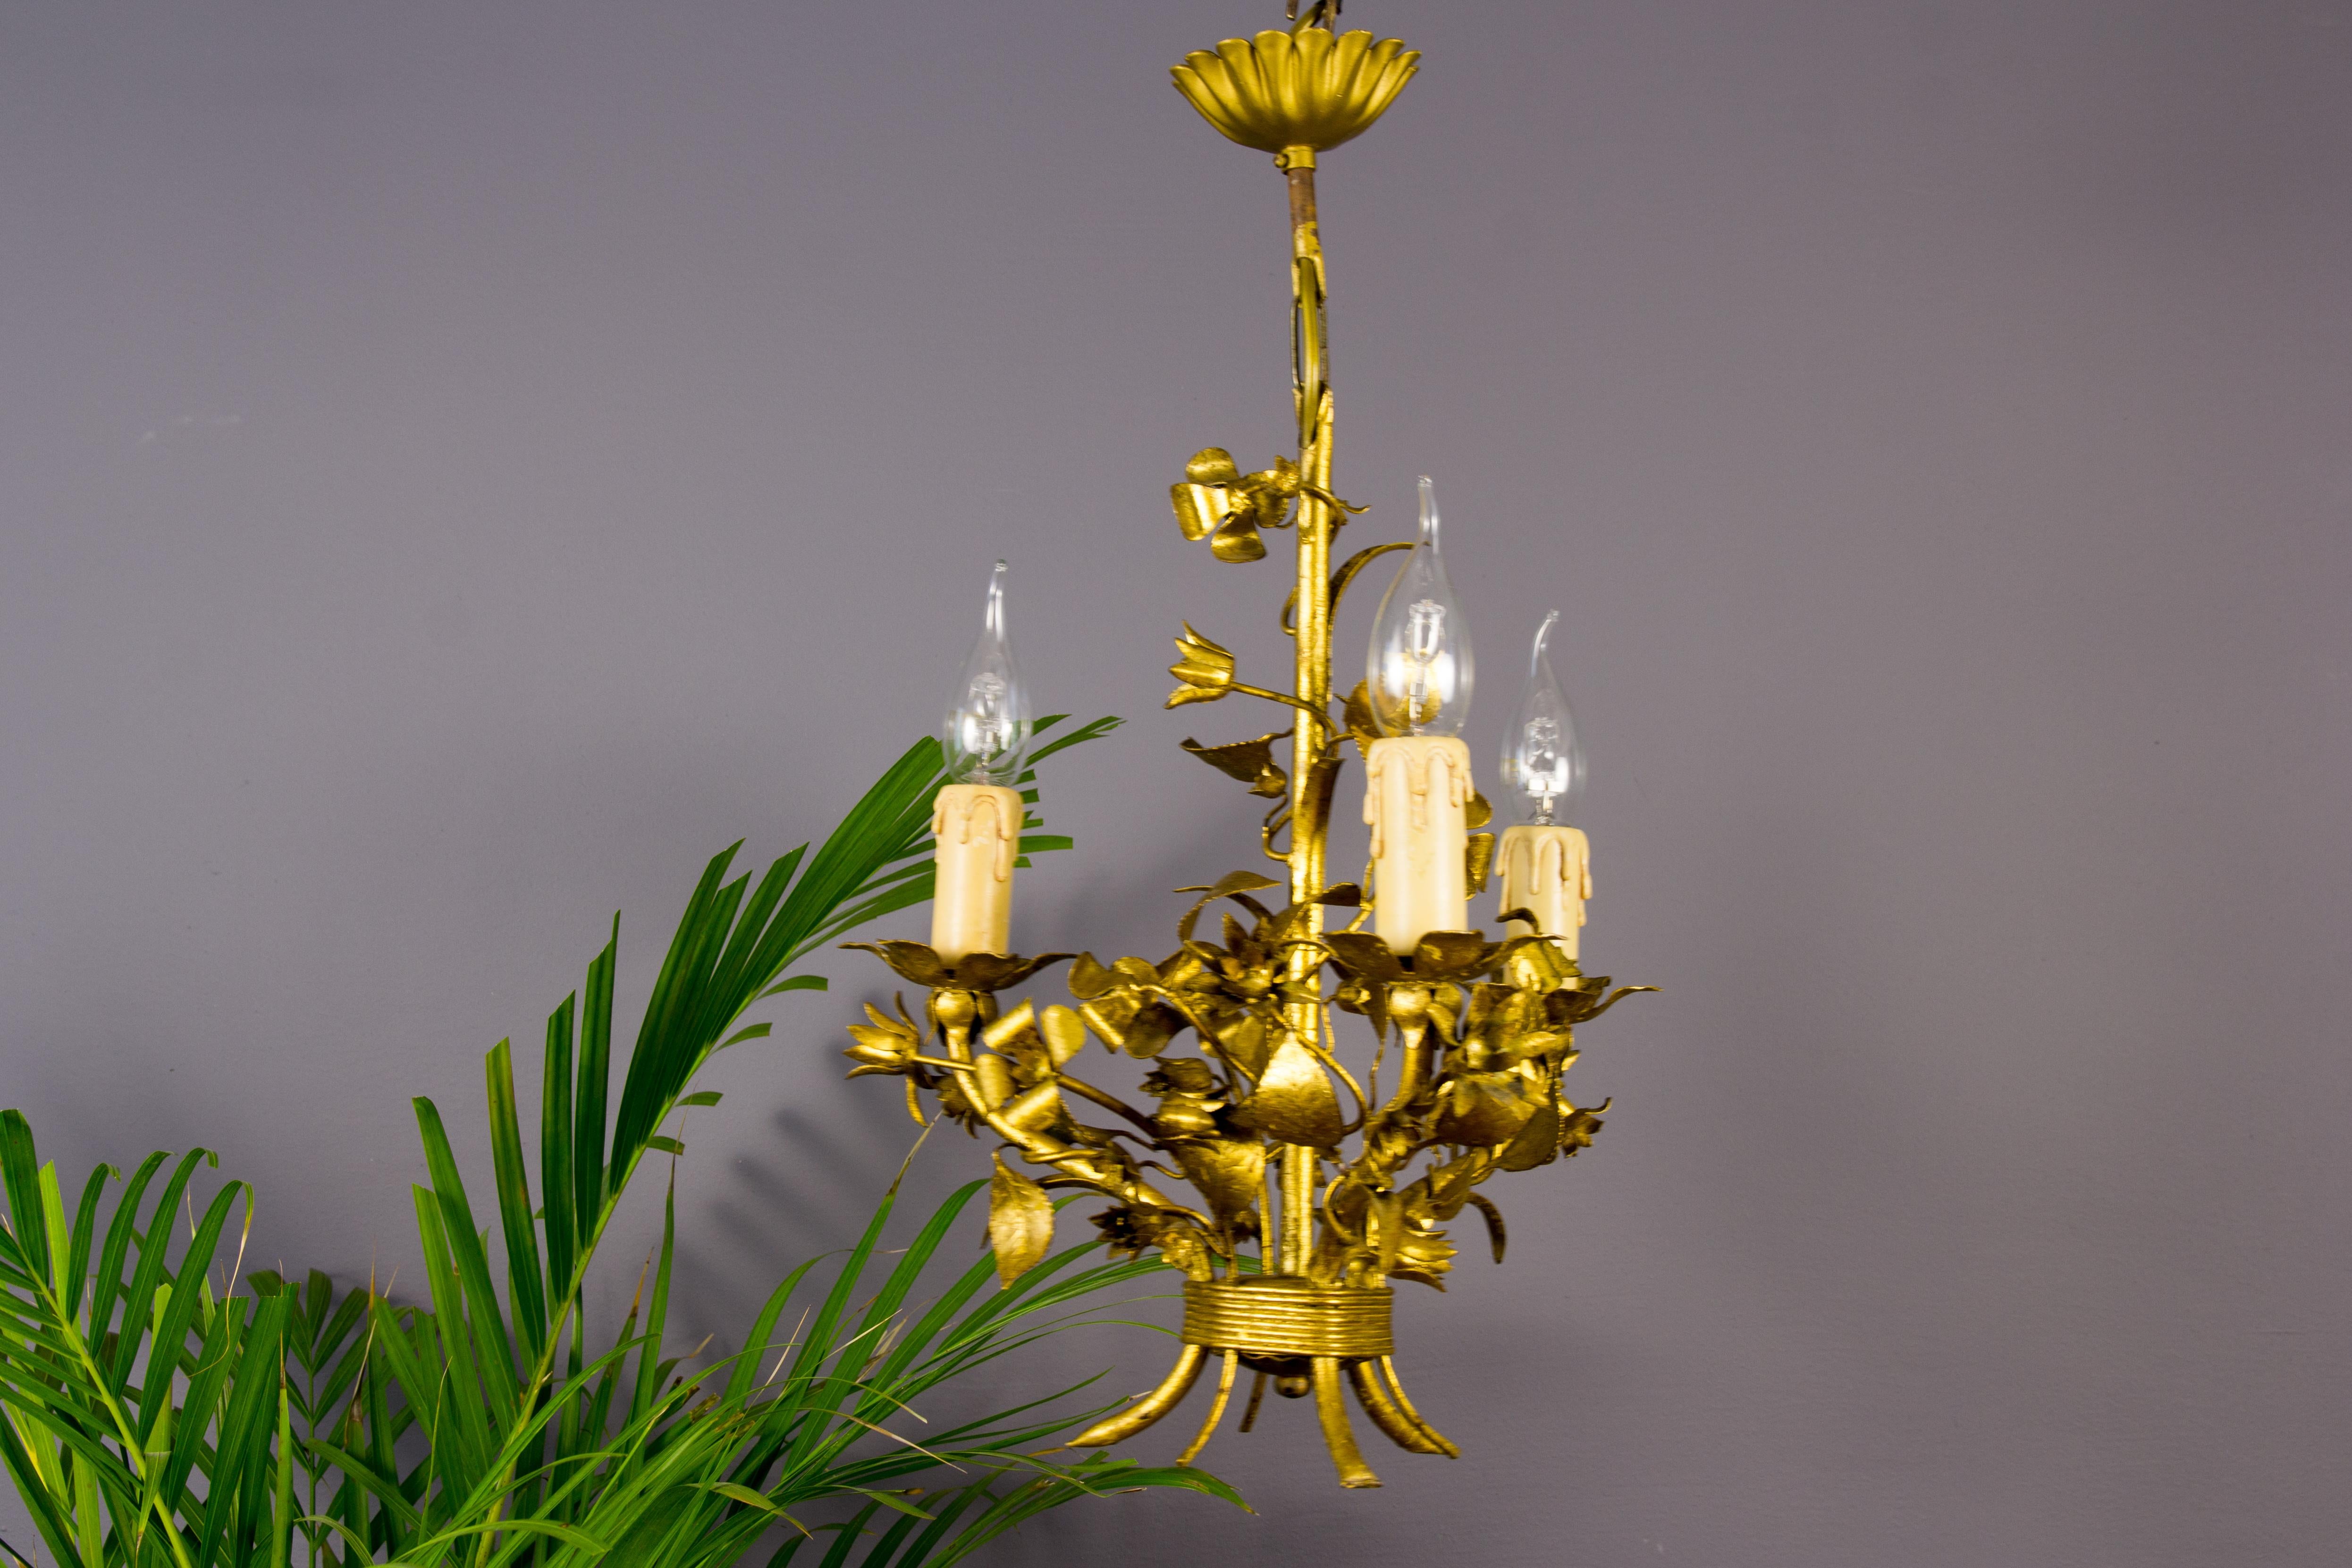 A tole chandelier produced in Italy in the 1950s. Finely made with gold-colored metal leaves and flowers, three arms with sockets for E 14 light bulbs. 
Dimensions:
Diameter: 32 cm / 12.59 in
Height: 52 cm / 20.47 in.